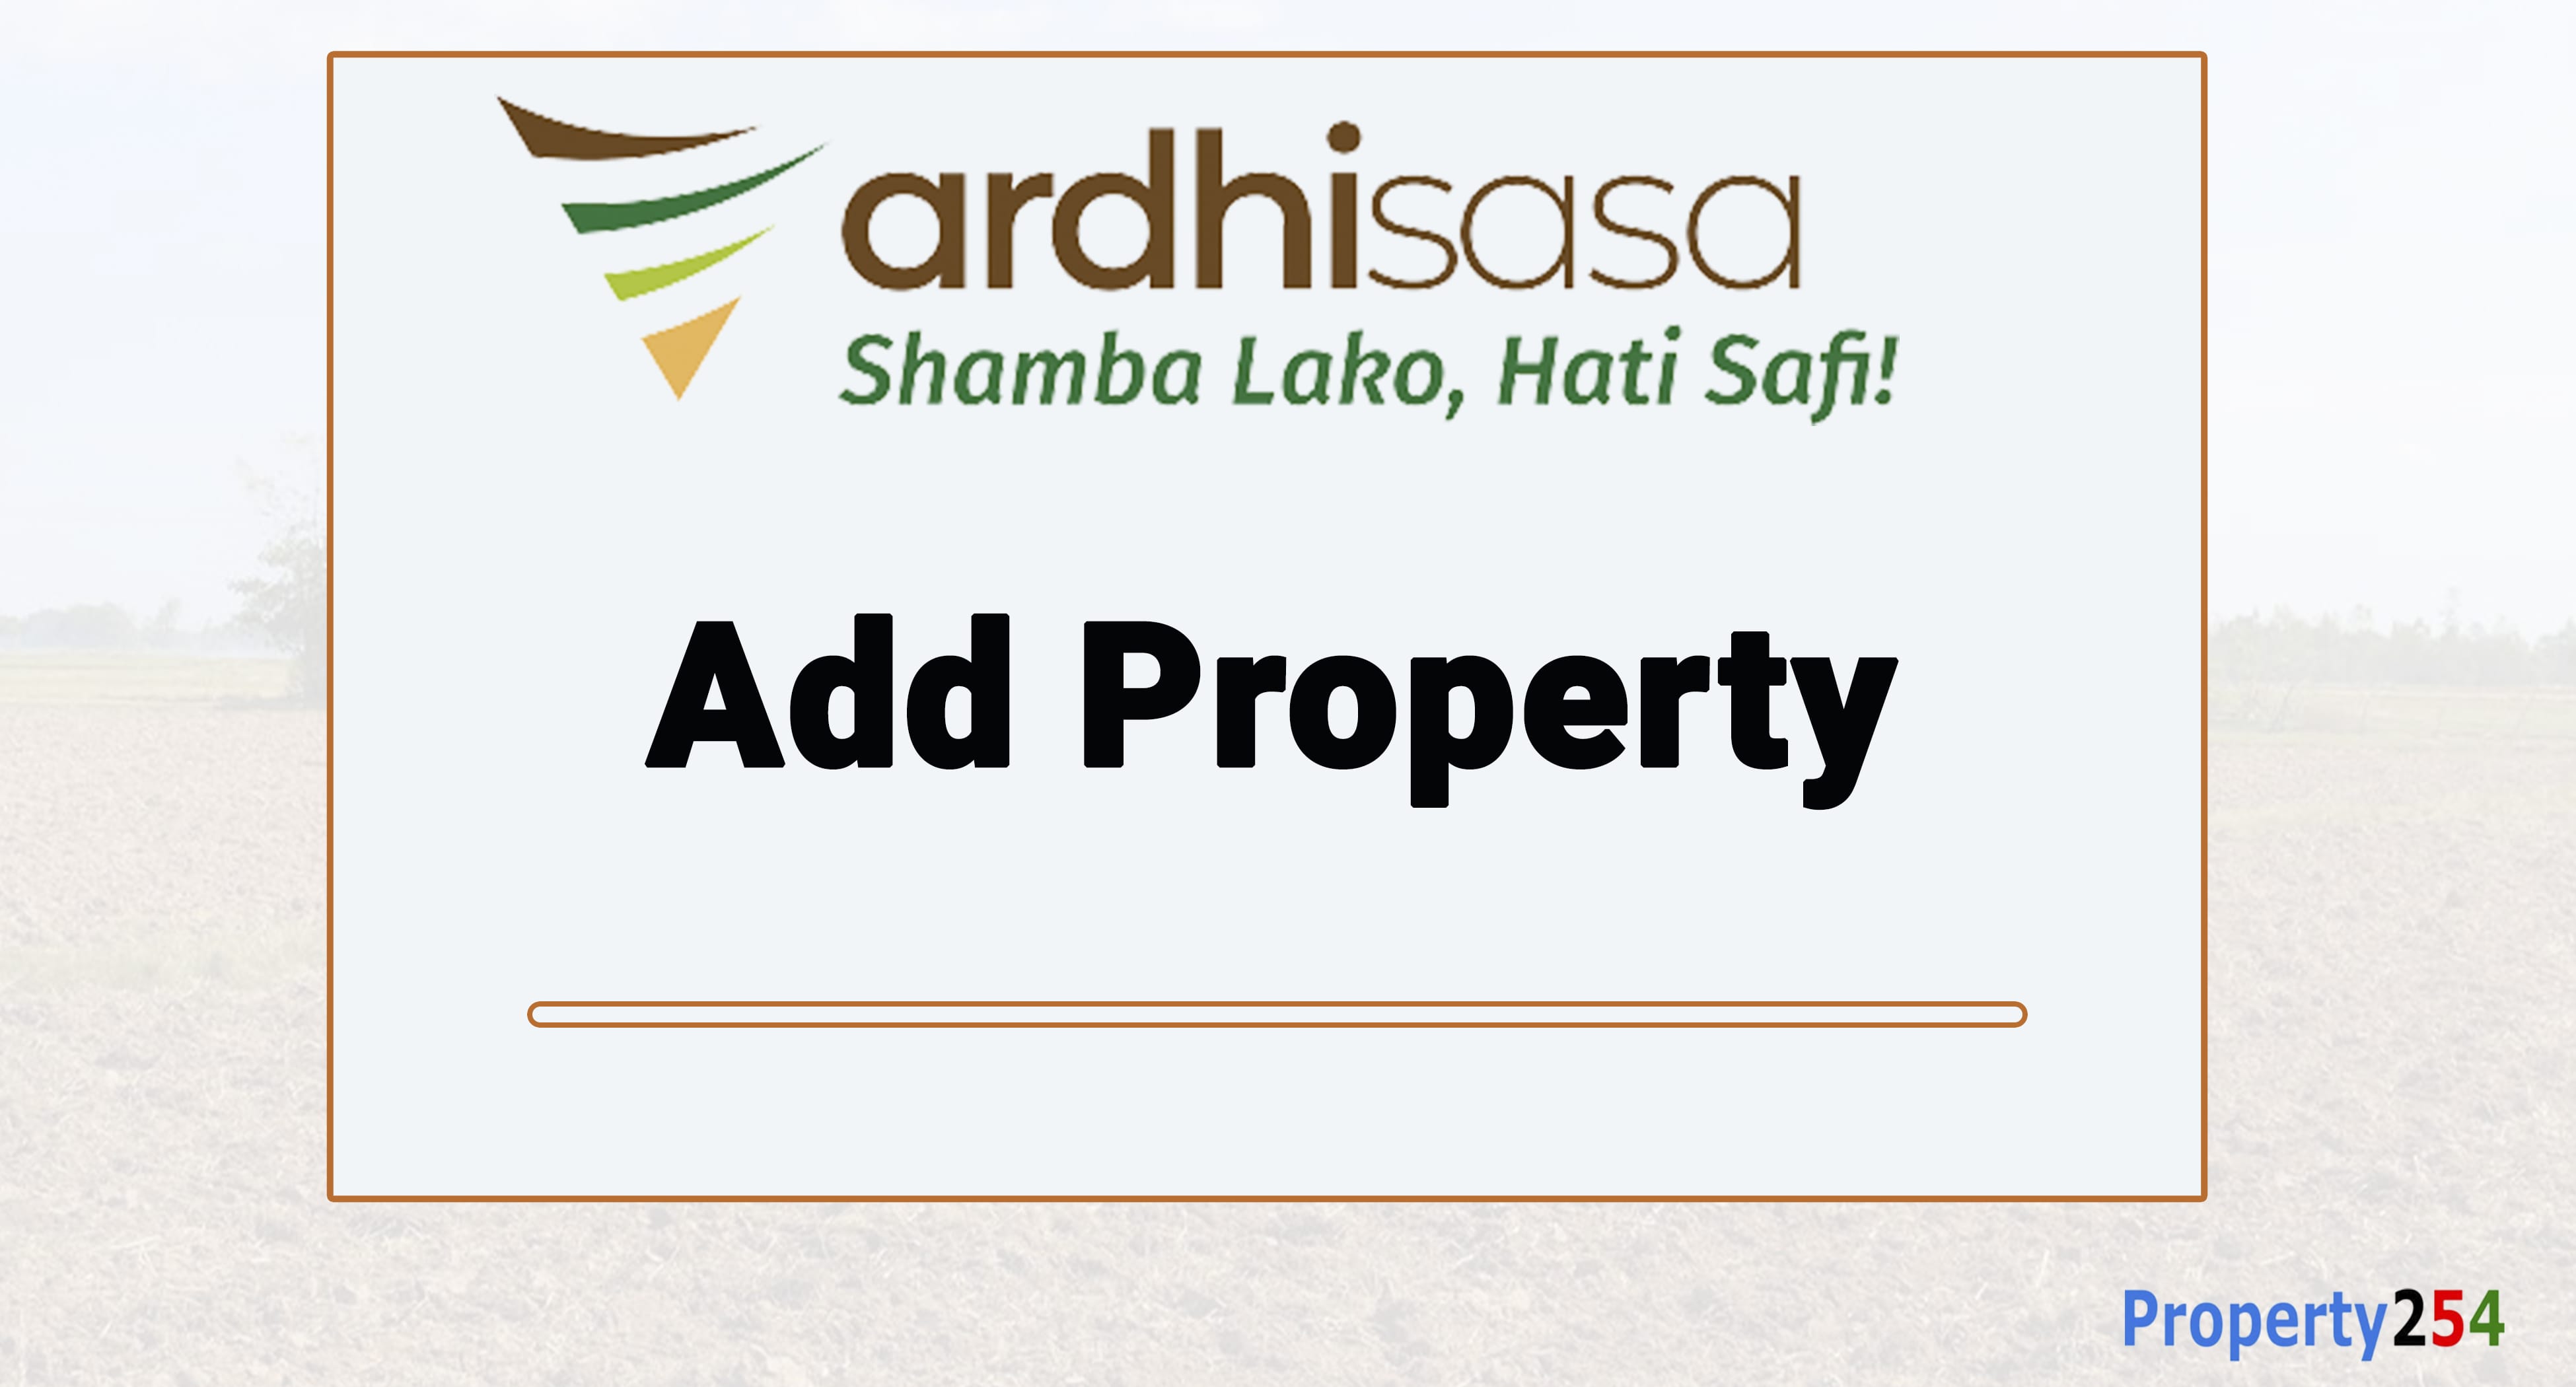 How to Add Property on Ardhisasa thumbnail